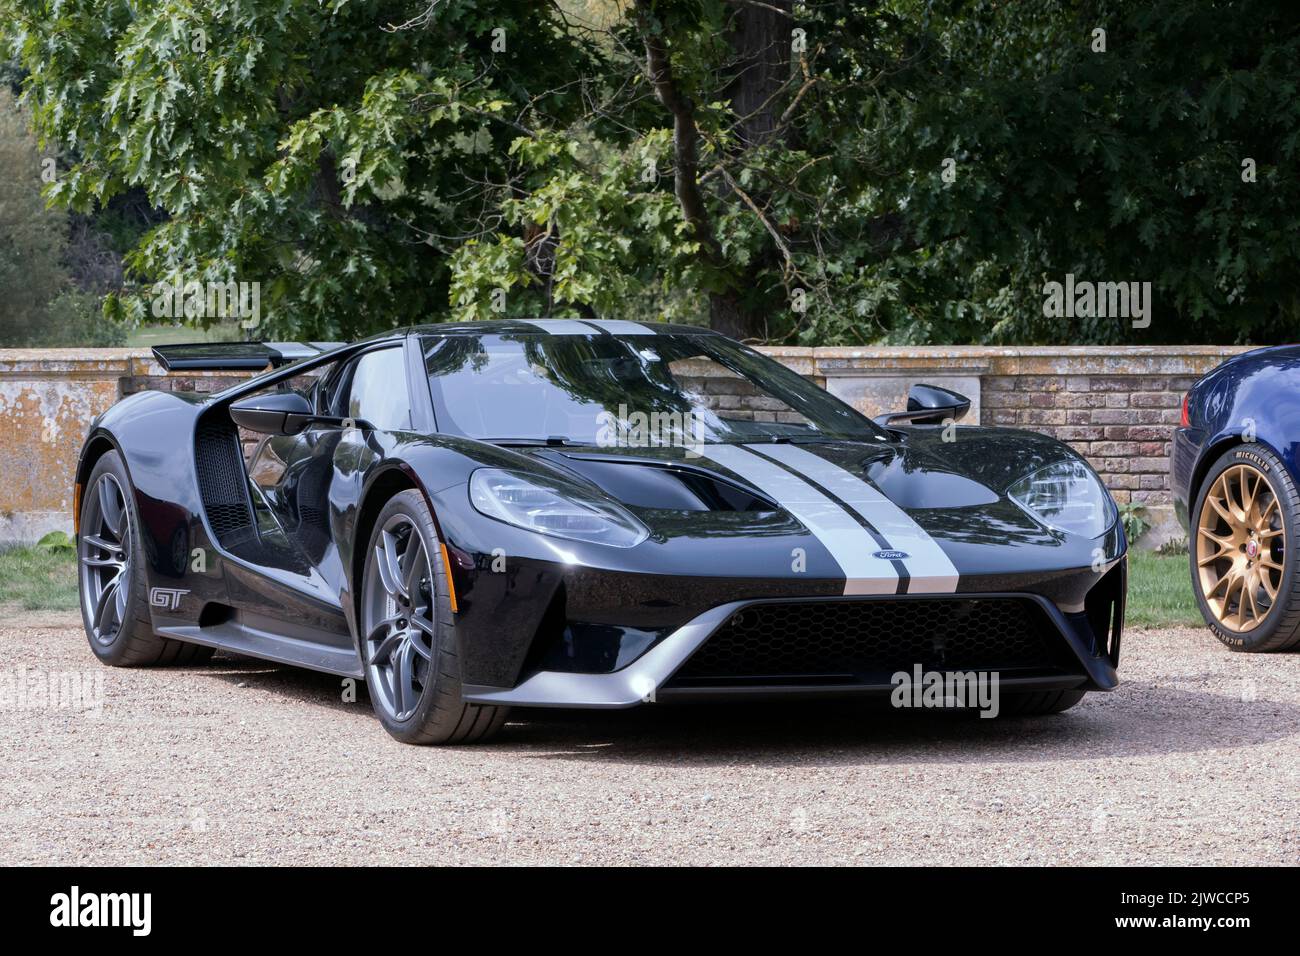 Ford Gt at the 2022 Hapton Court Concours at Hampton Court Palace London UK Stock Photo